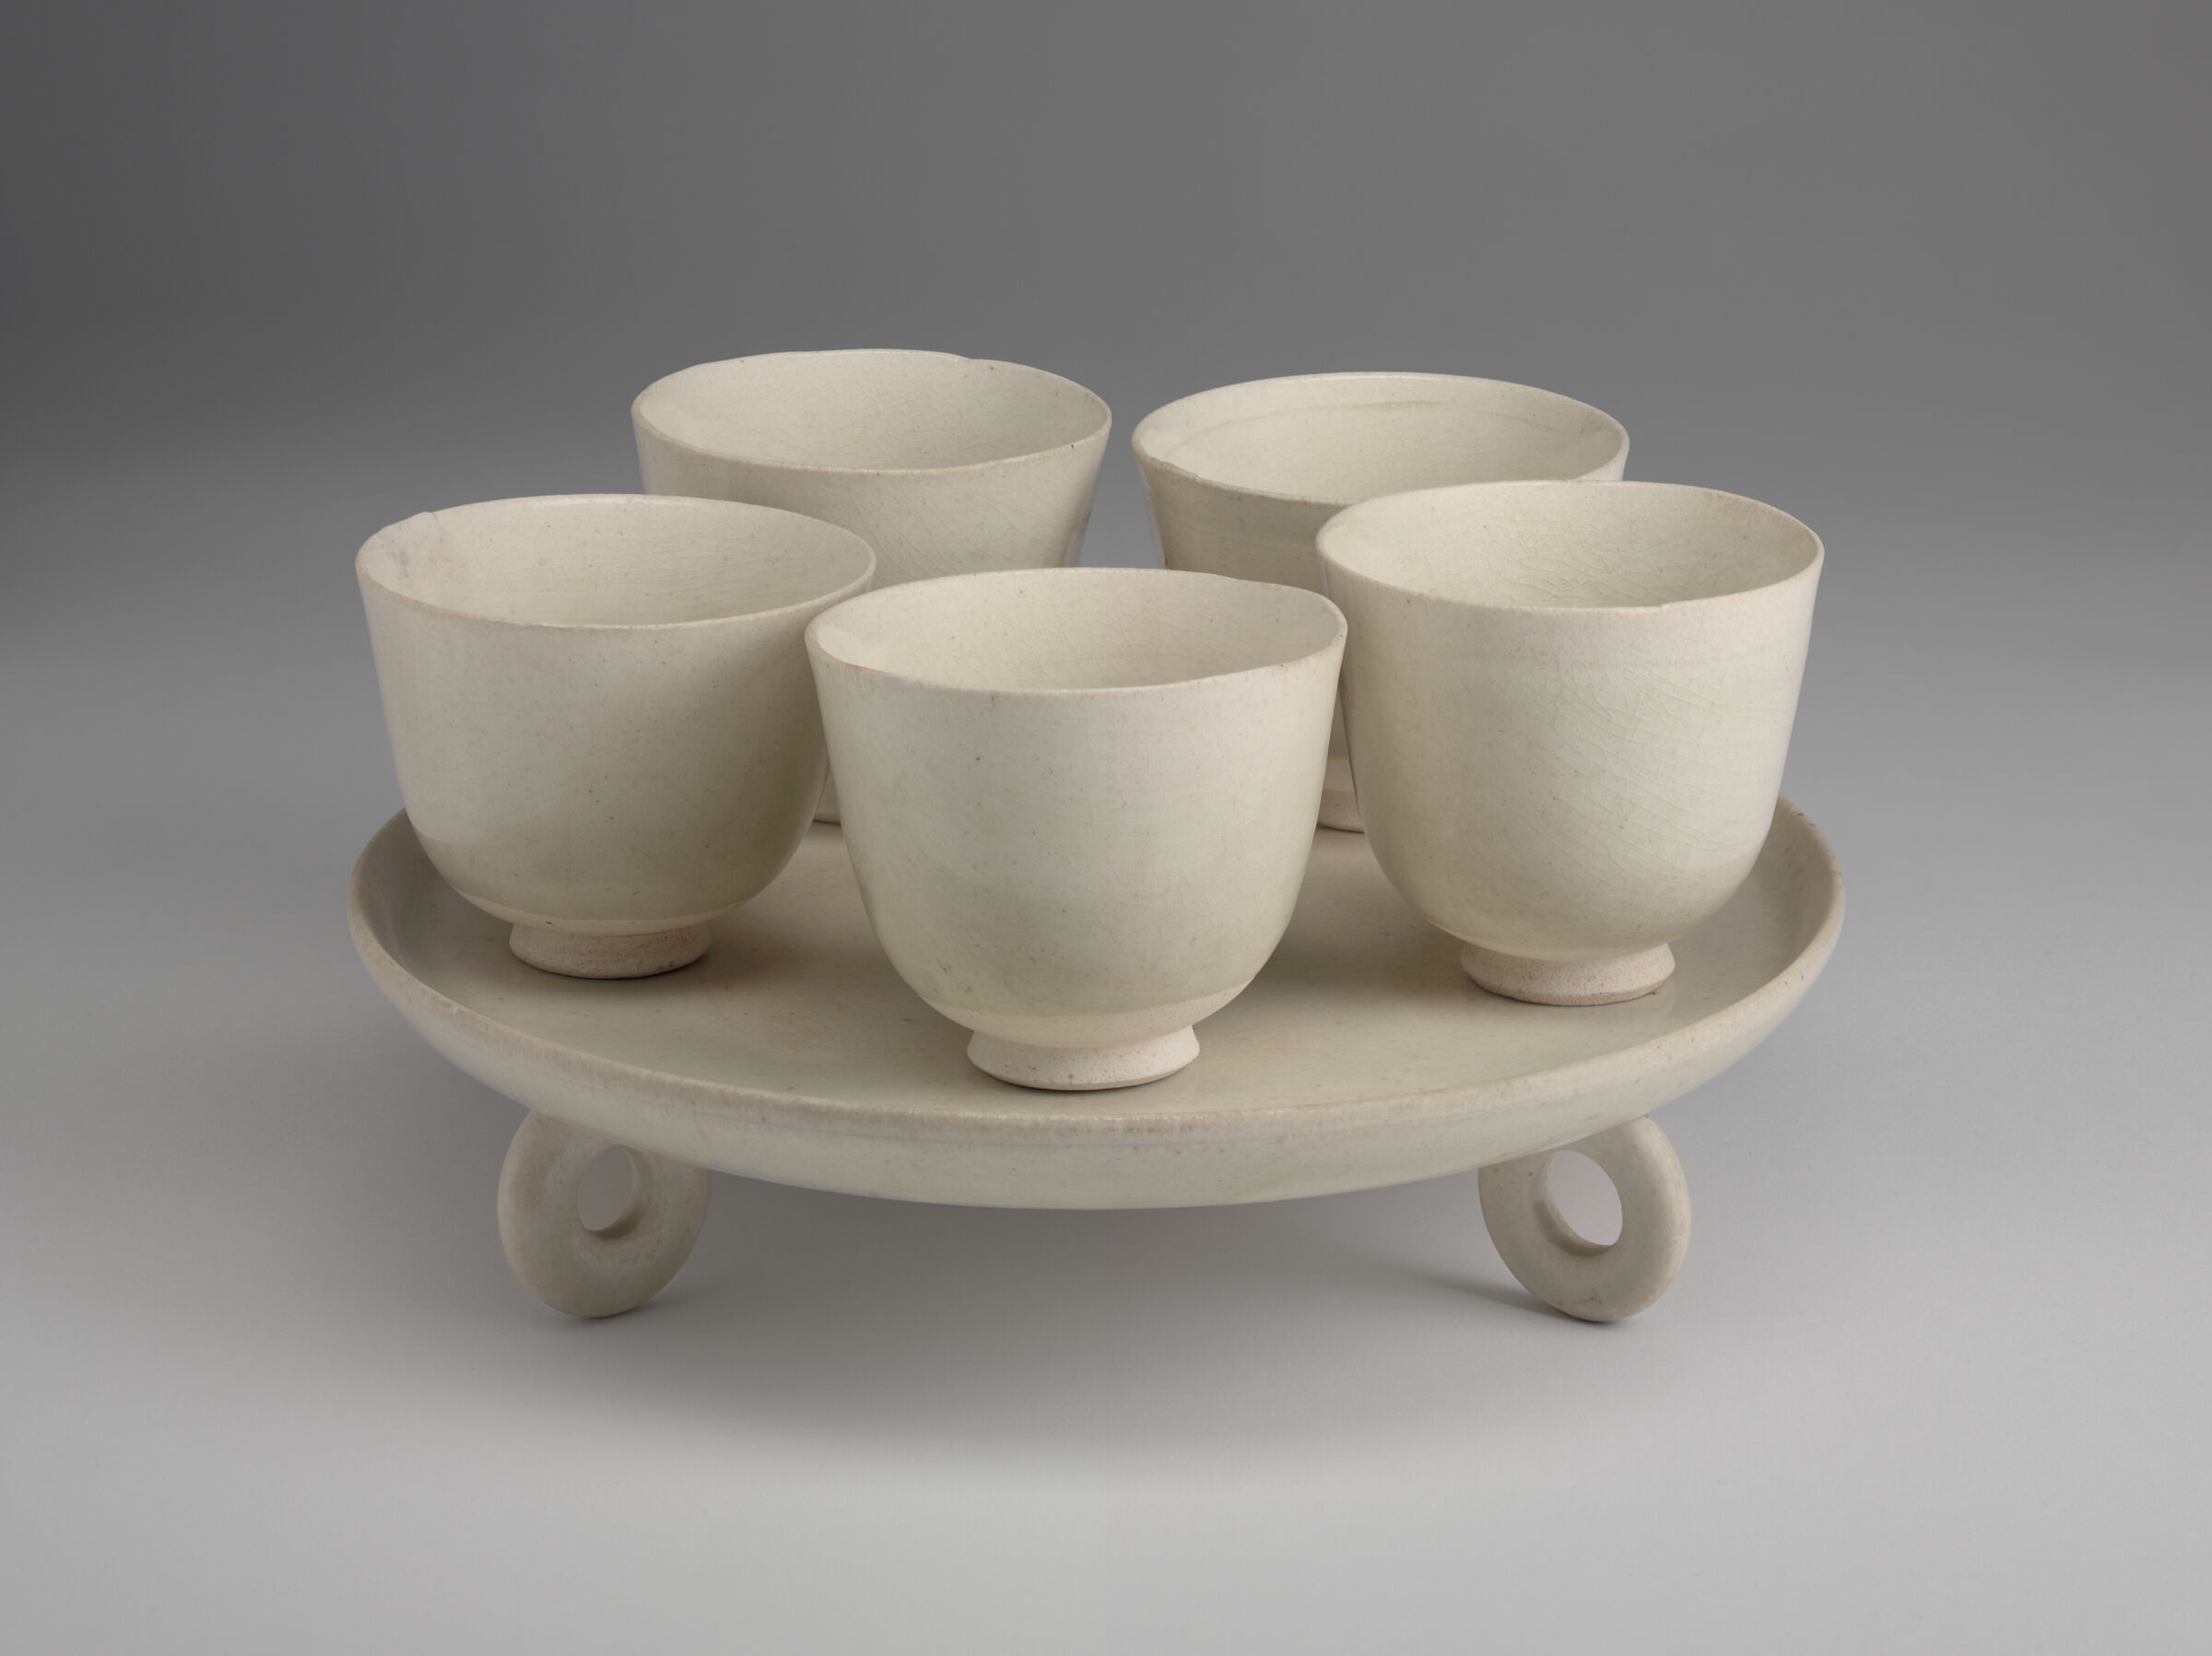 Circular Tray With Three Ring-Form-Feet And Five Cups